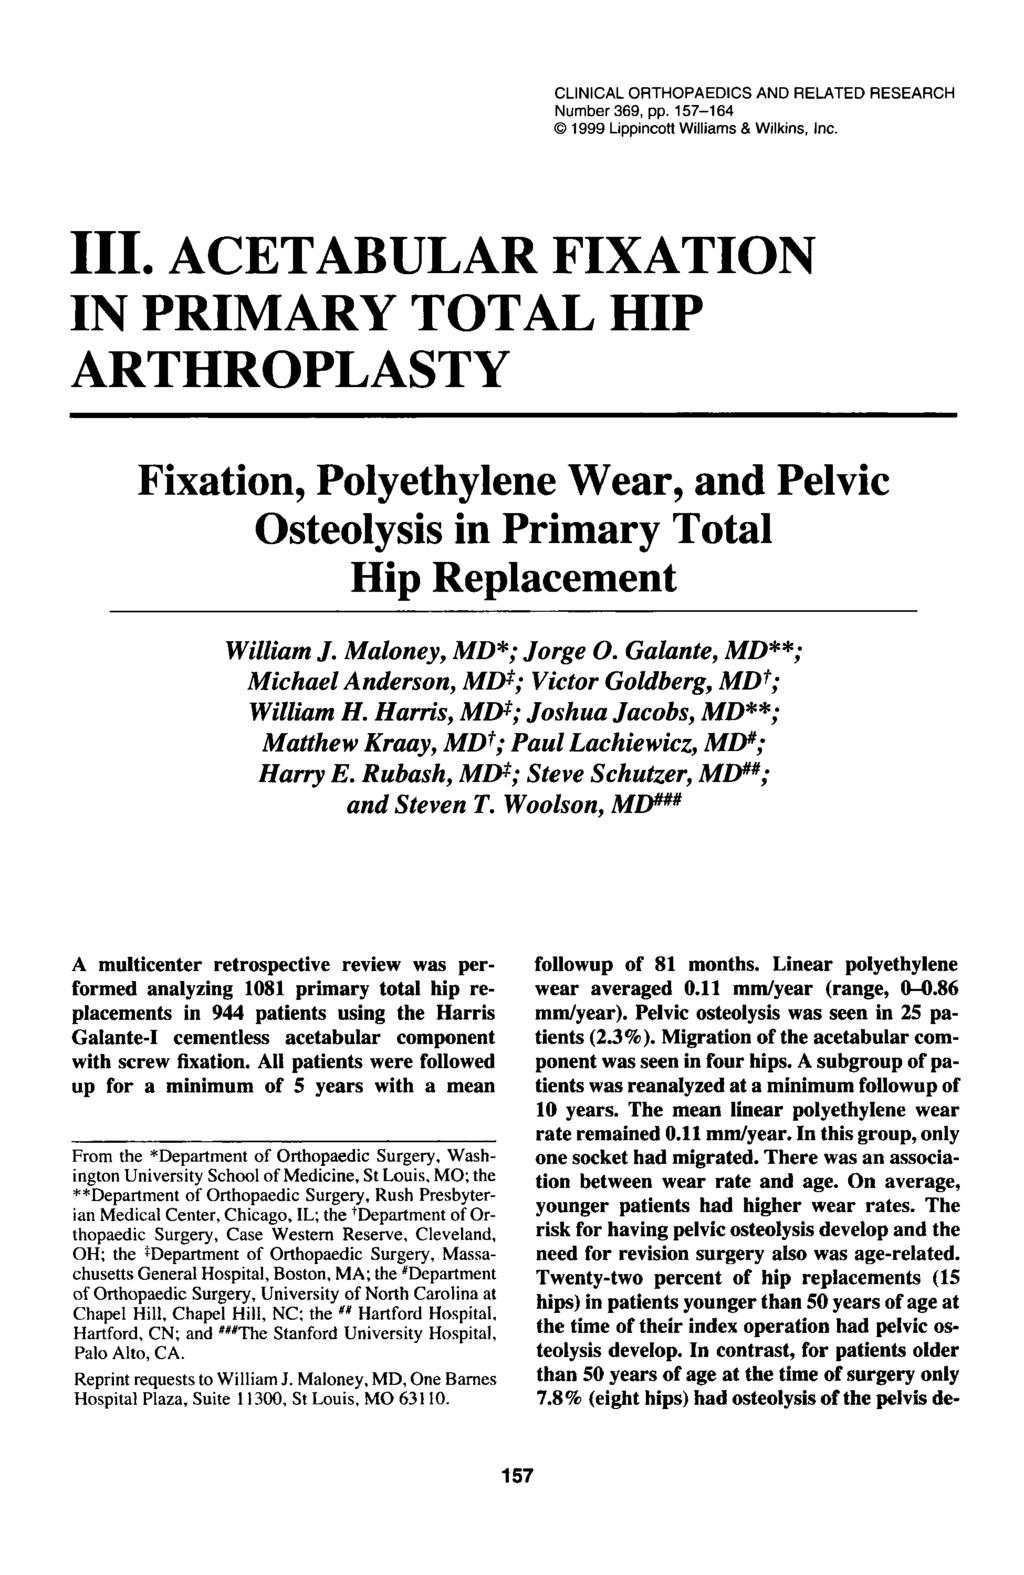 CLINICAL ORTHOPAEDICS AND RELATED RESEARCH Number 369, pp. 157-164 0 1999 Lippincott Williams & Wilkins, Inc. 111.